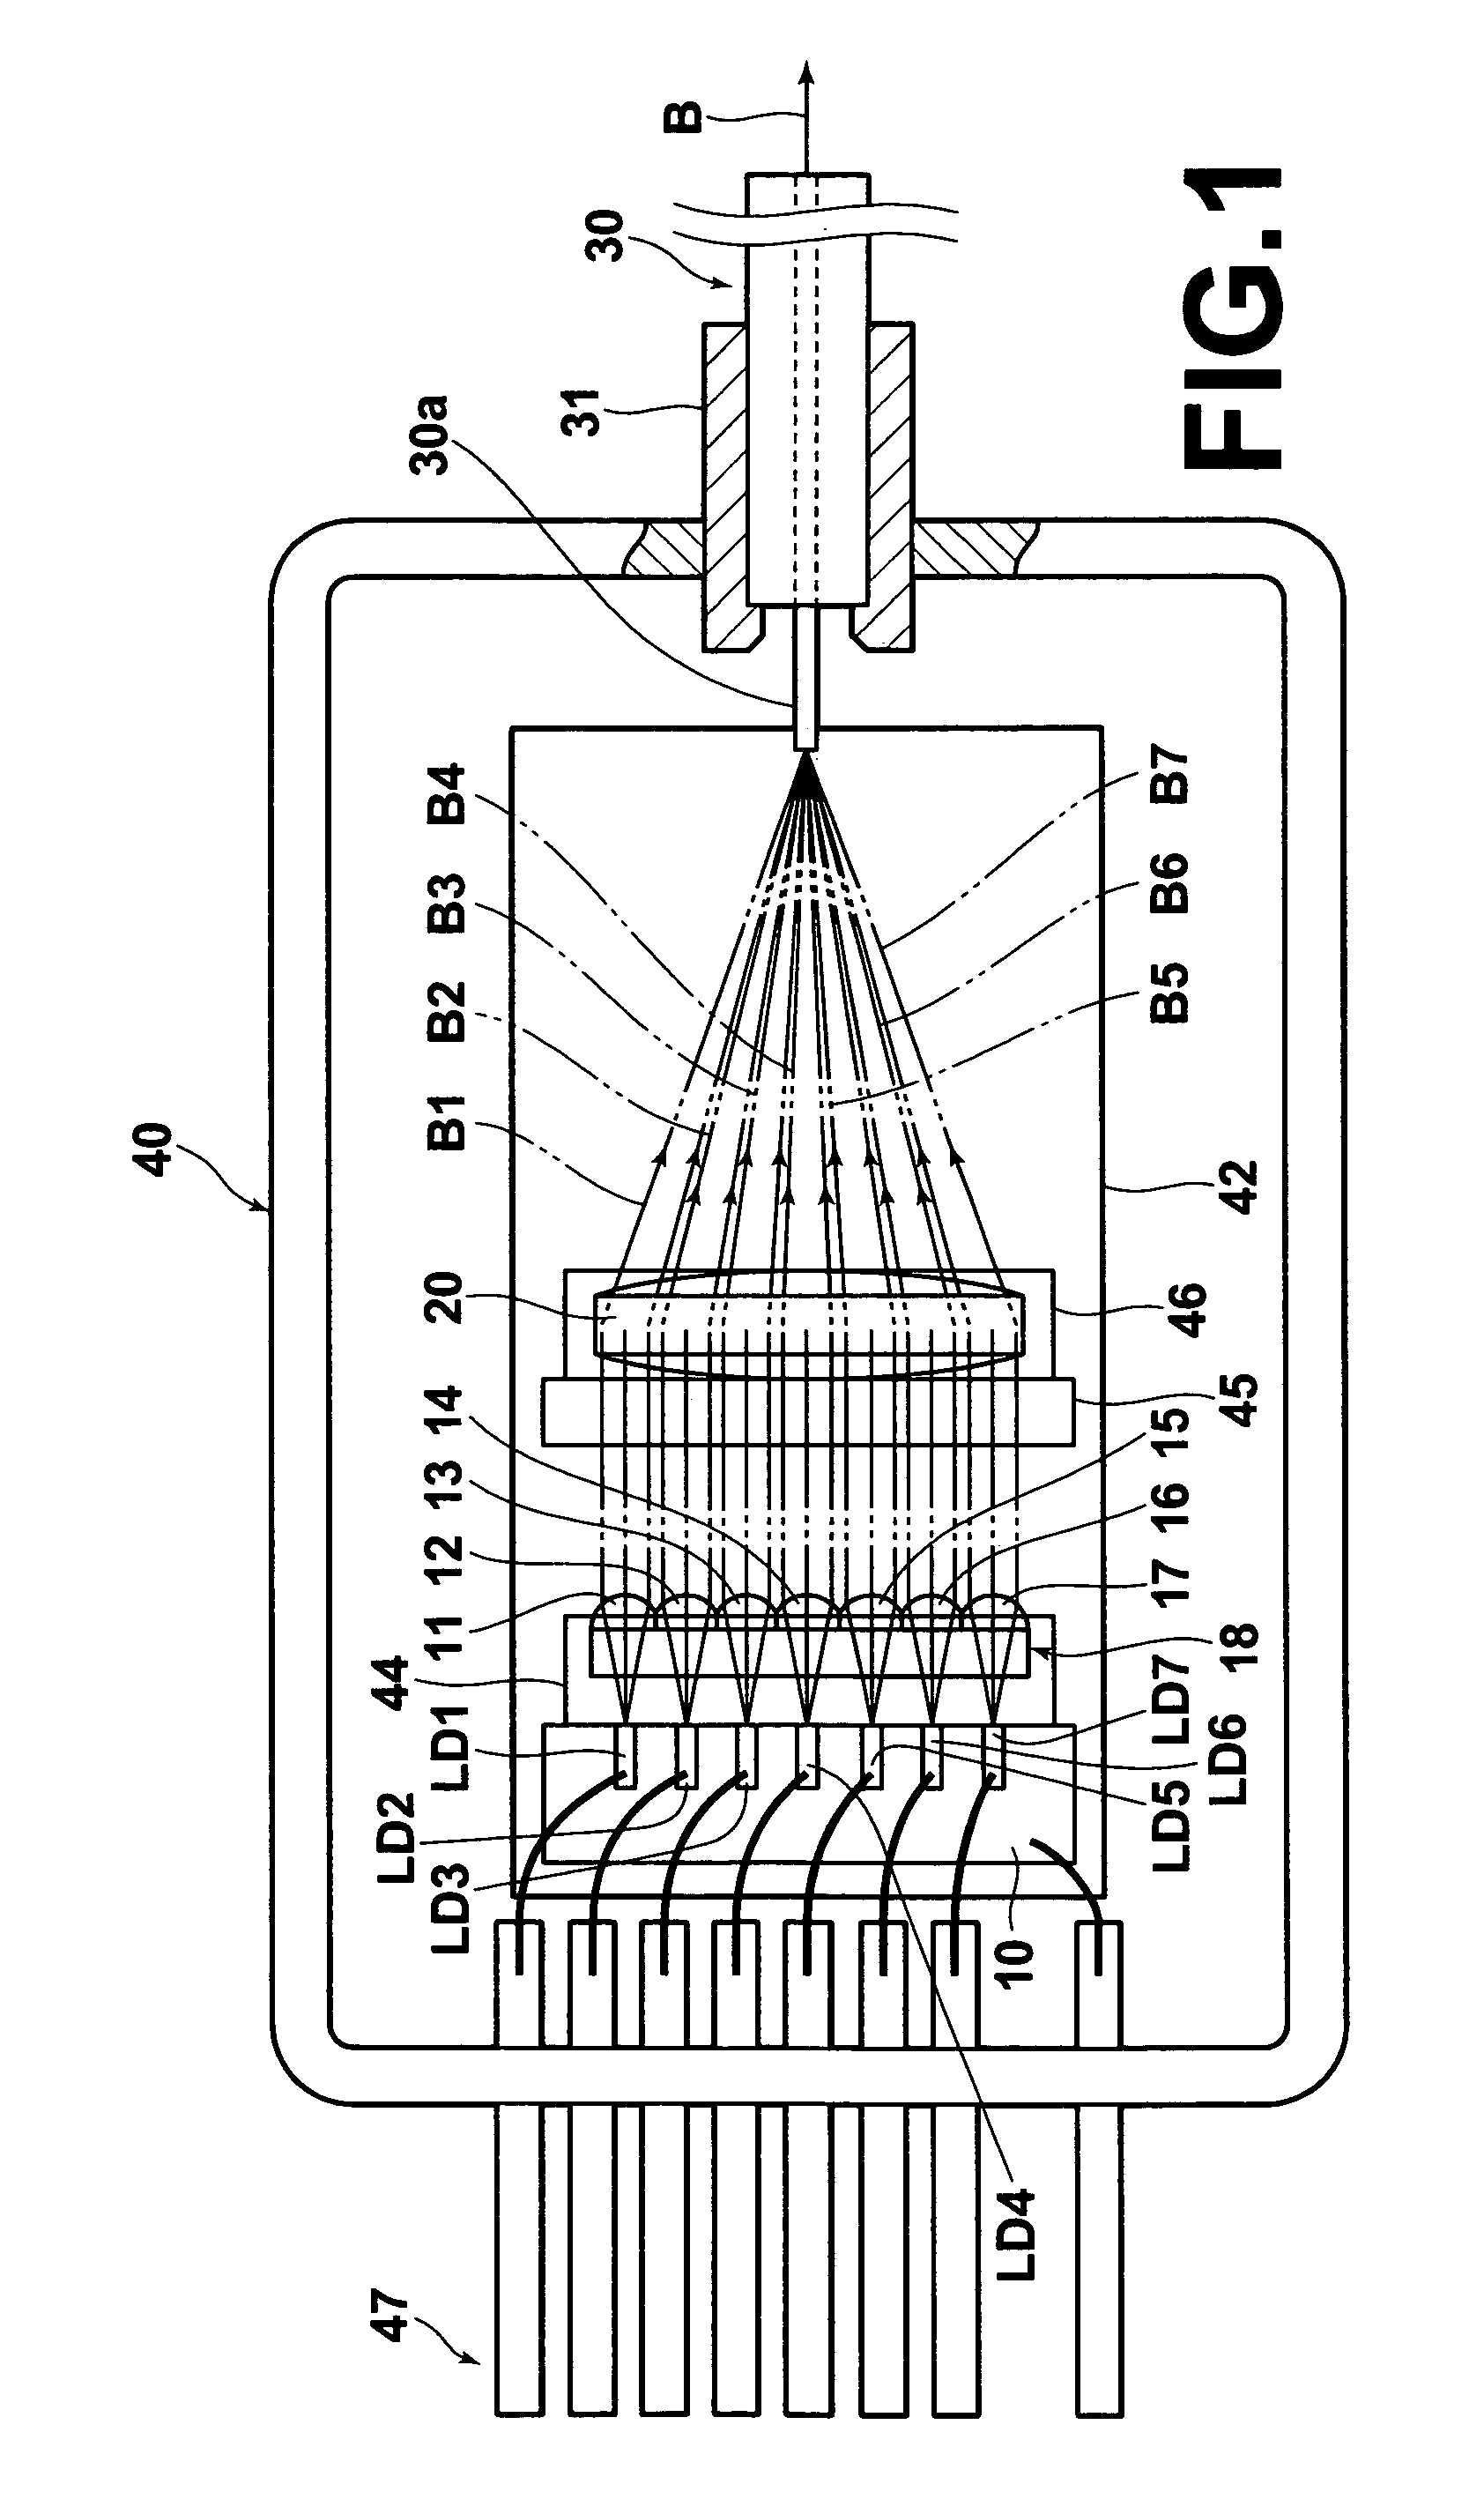 Laser apparatus and method for assembling the laser apparatus